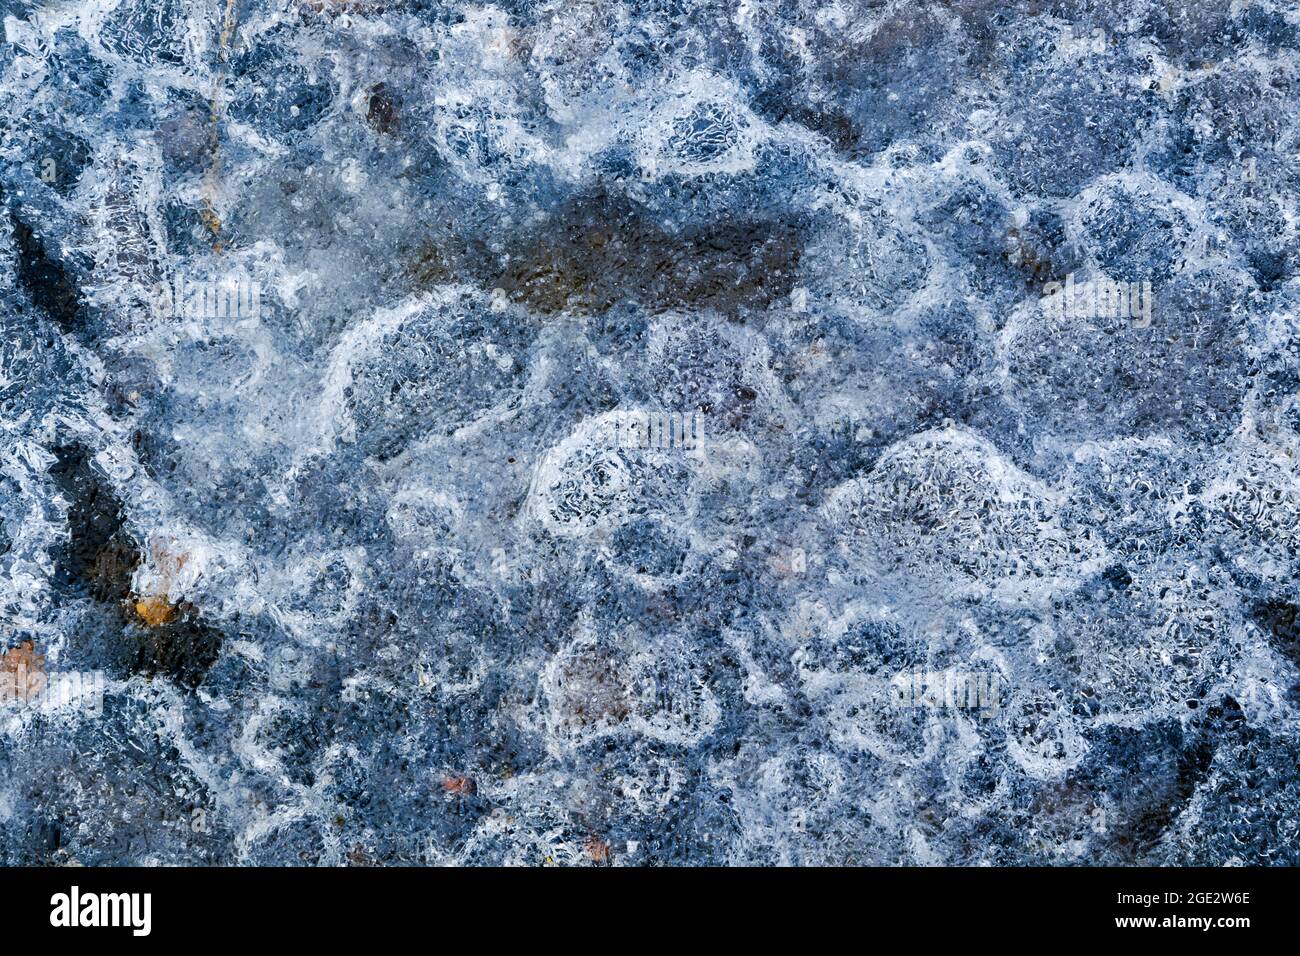 Ice encapsulating small stones, leaves and air bubbles, creating a highly textured effect Stock Photo